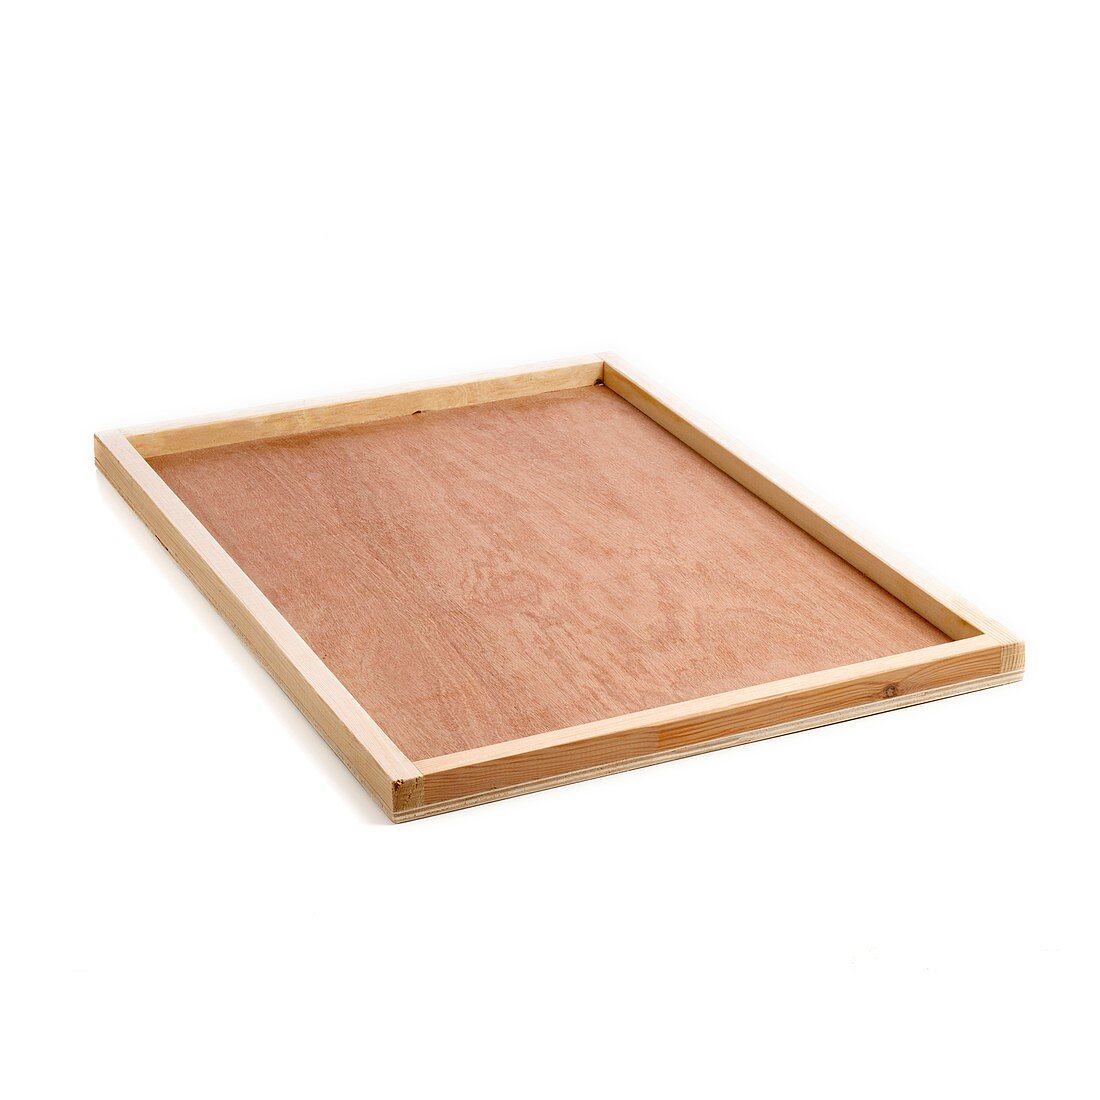 Wooden dissection tray